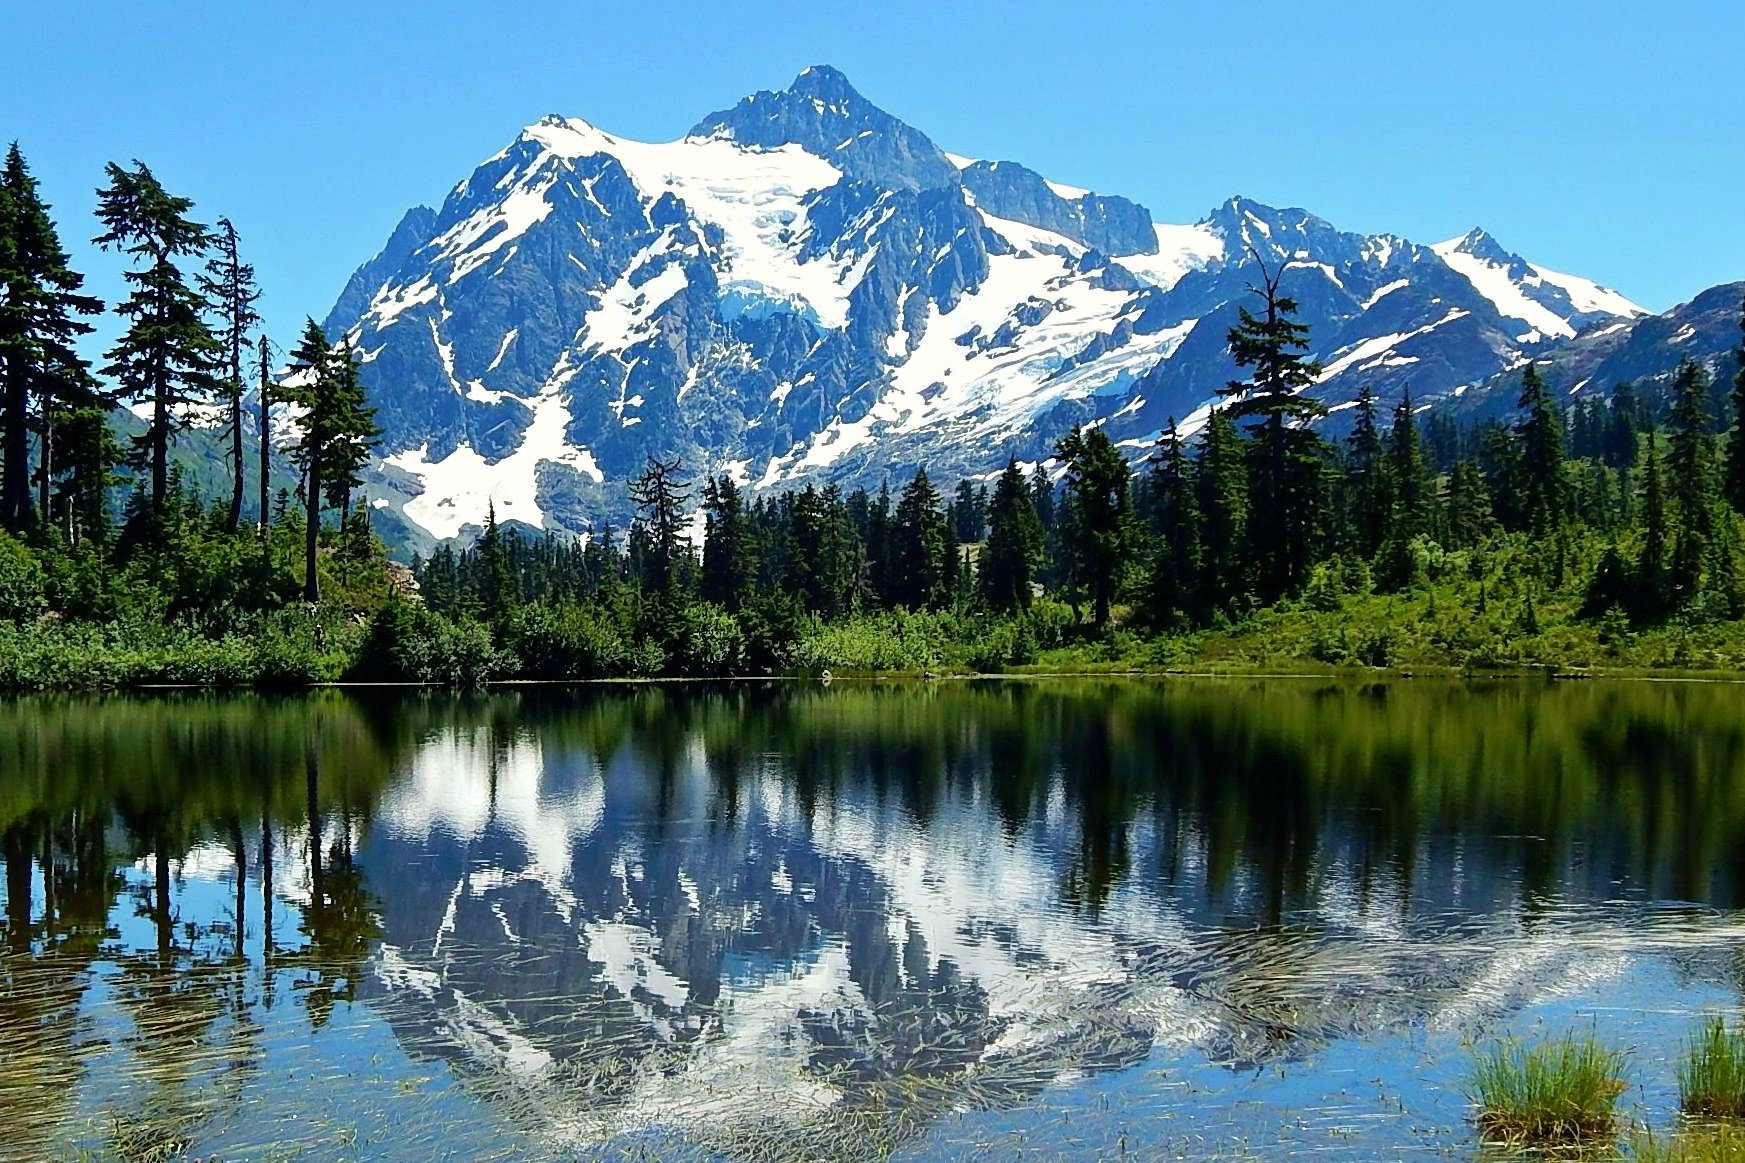 must see places to visit in washington state